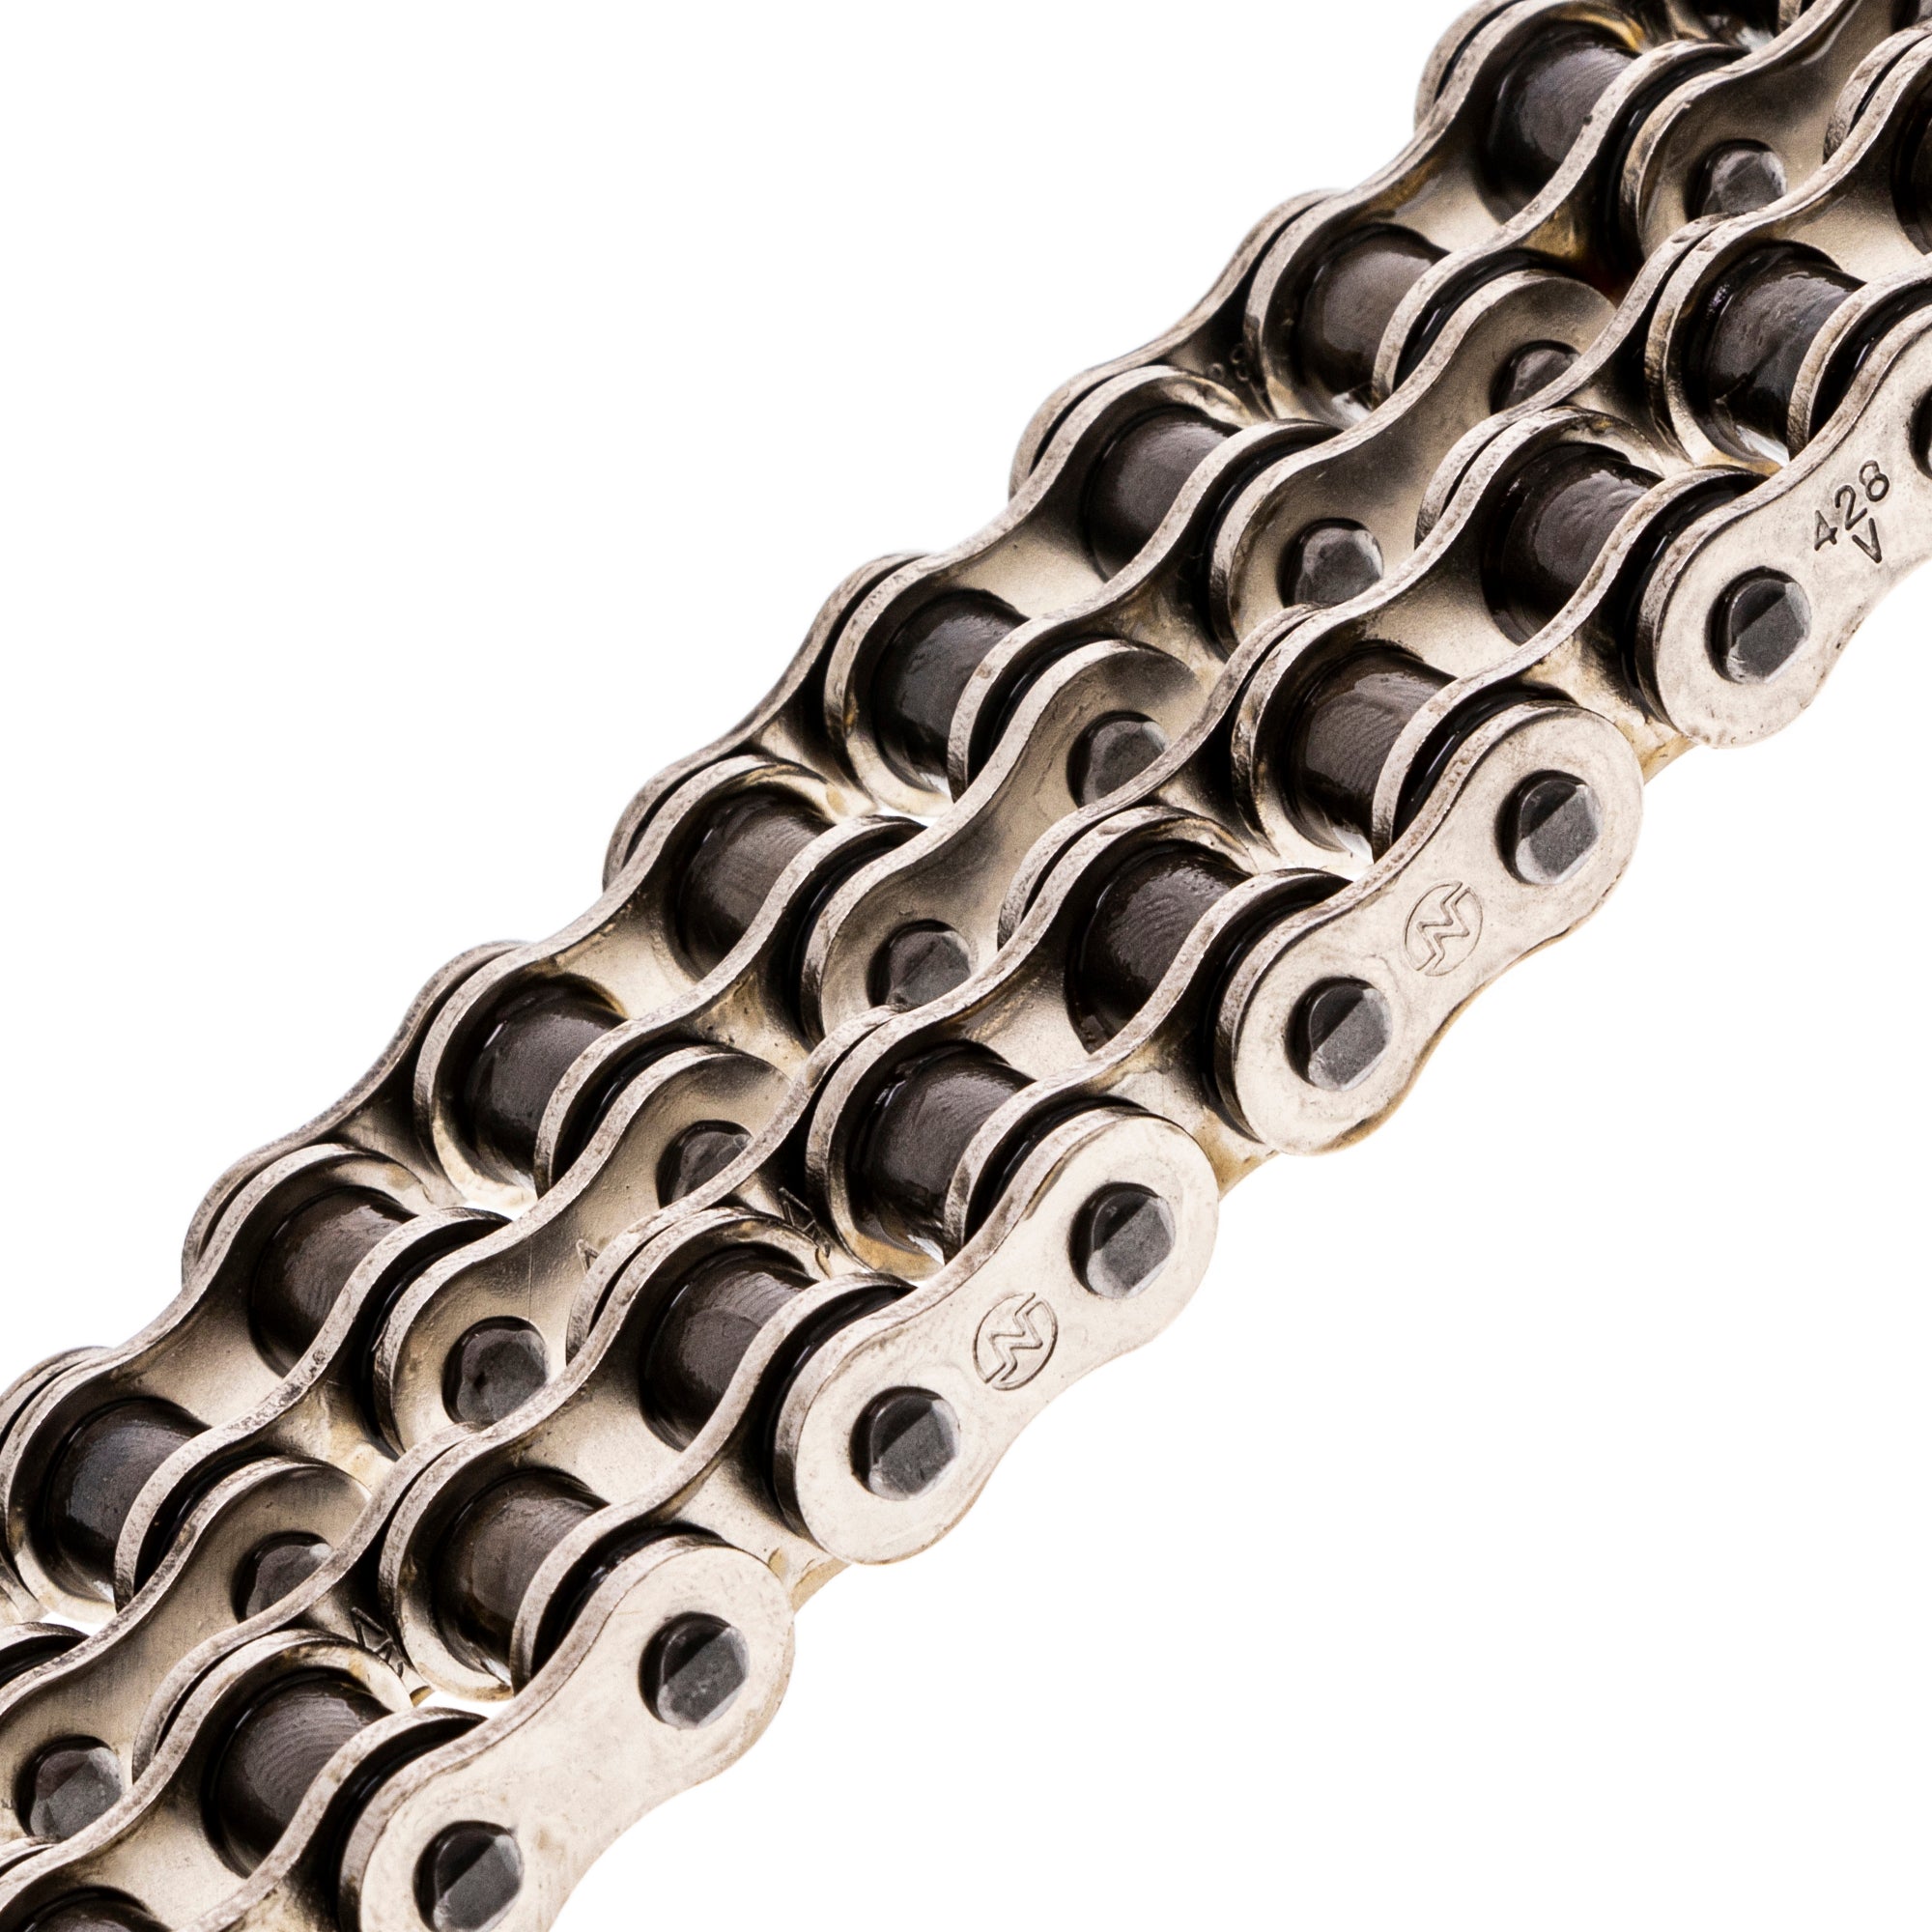 Drive Chain 86 O-Ring w/ Master Link for zOTHER ATC90 ATC110 5358 405W3-121-505 NICHE 519-CDC2469H